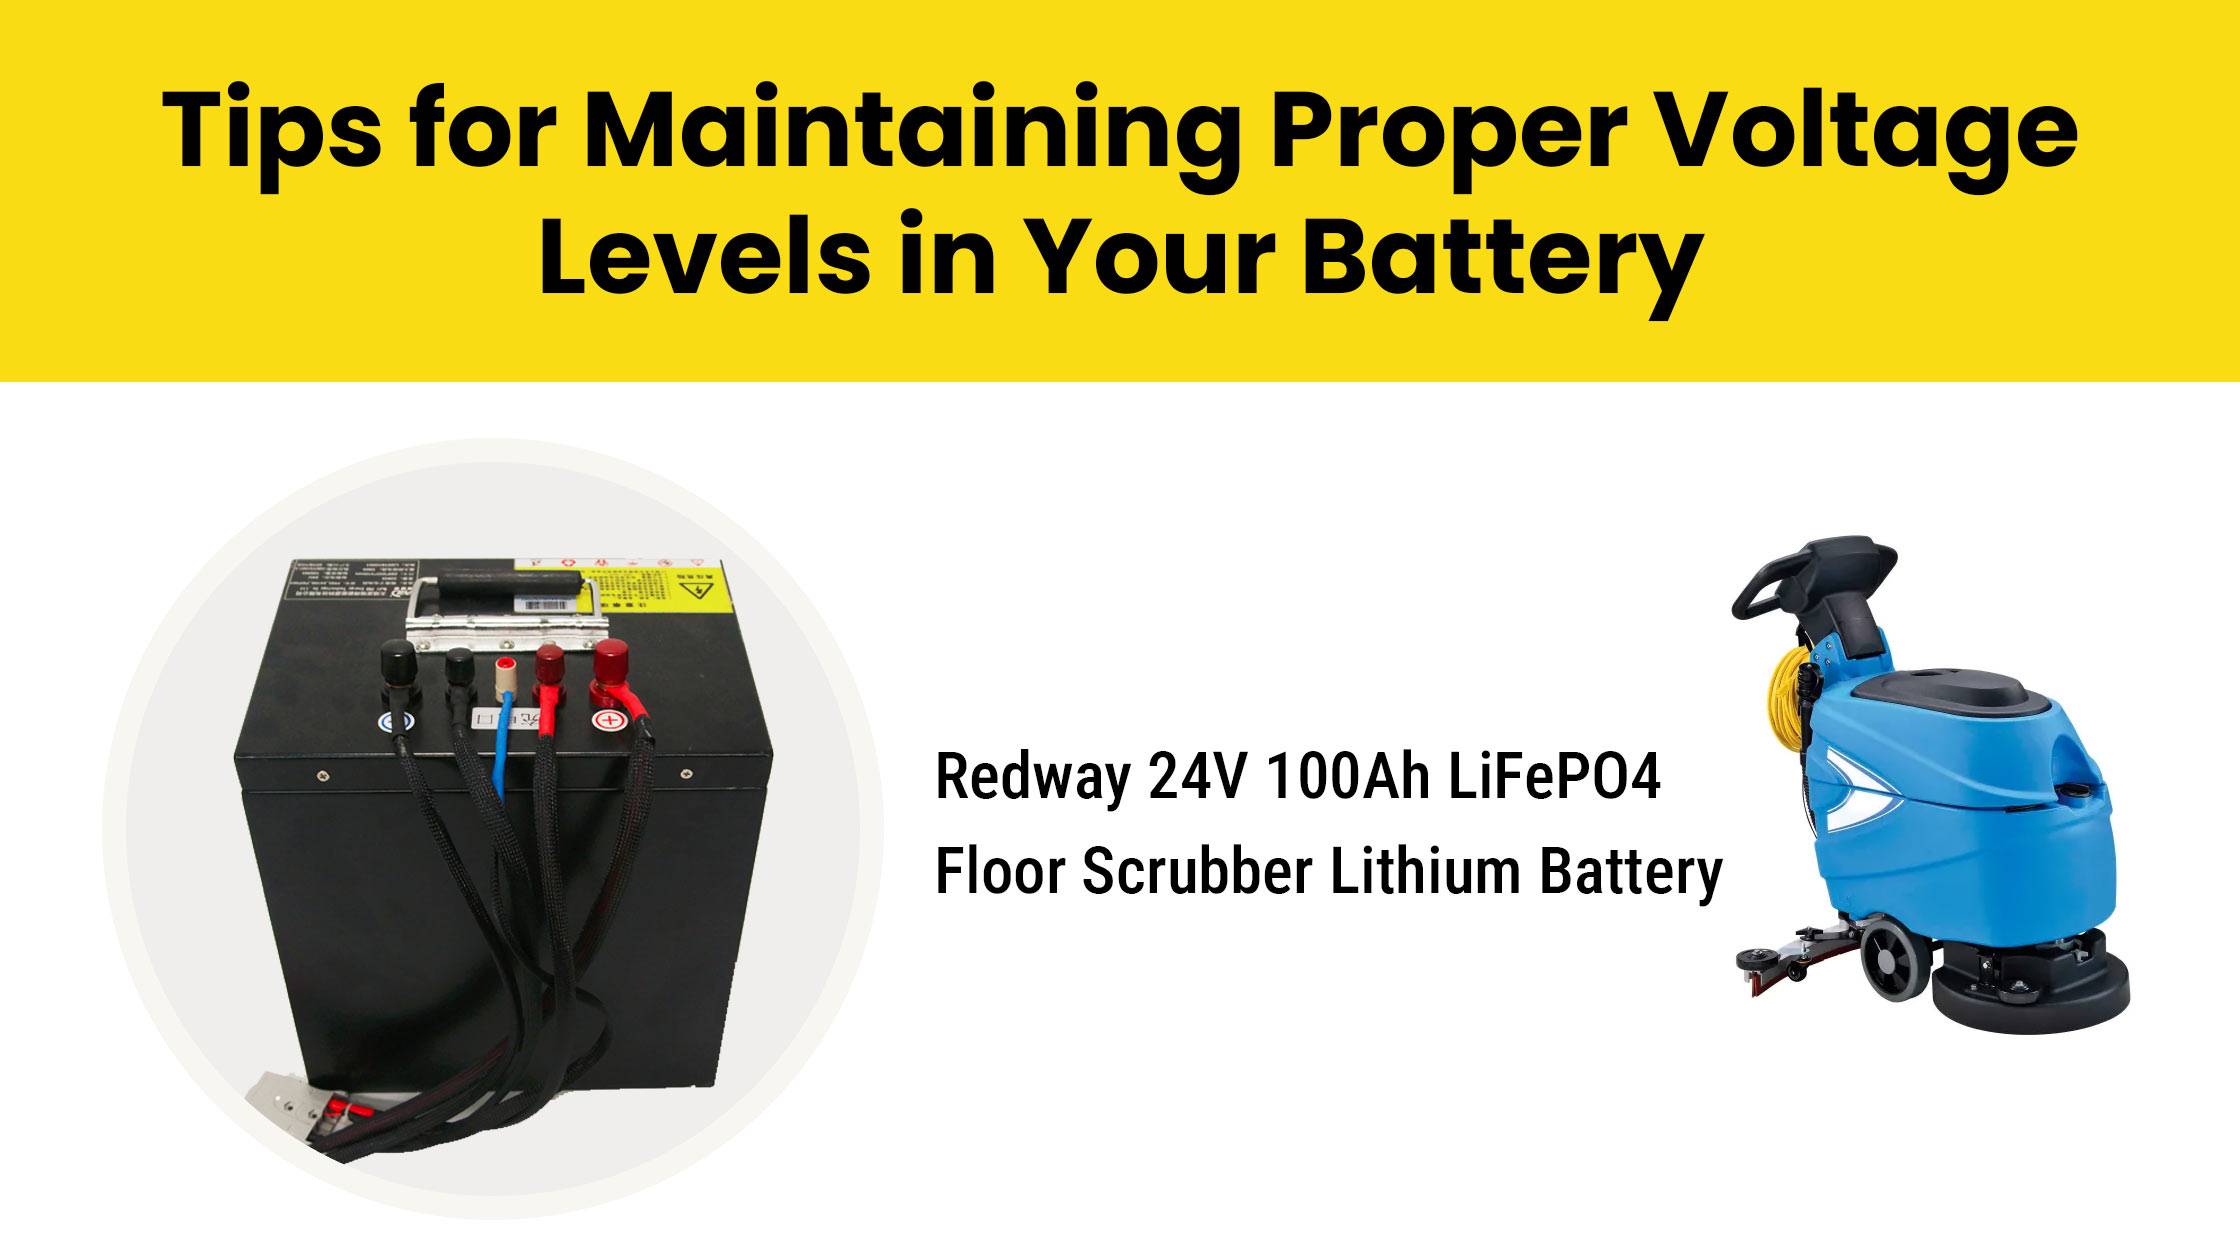 Tips for Maintaining Proper Voltage Levels in Your Battery. What Is The Maximum Allowed Voltage Of A 12V Battery? 24v 100ah lifepo4 battery Floor scrubber redway